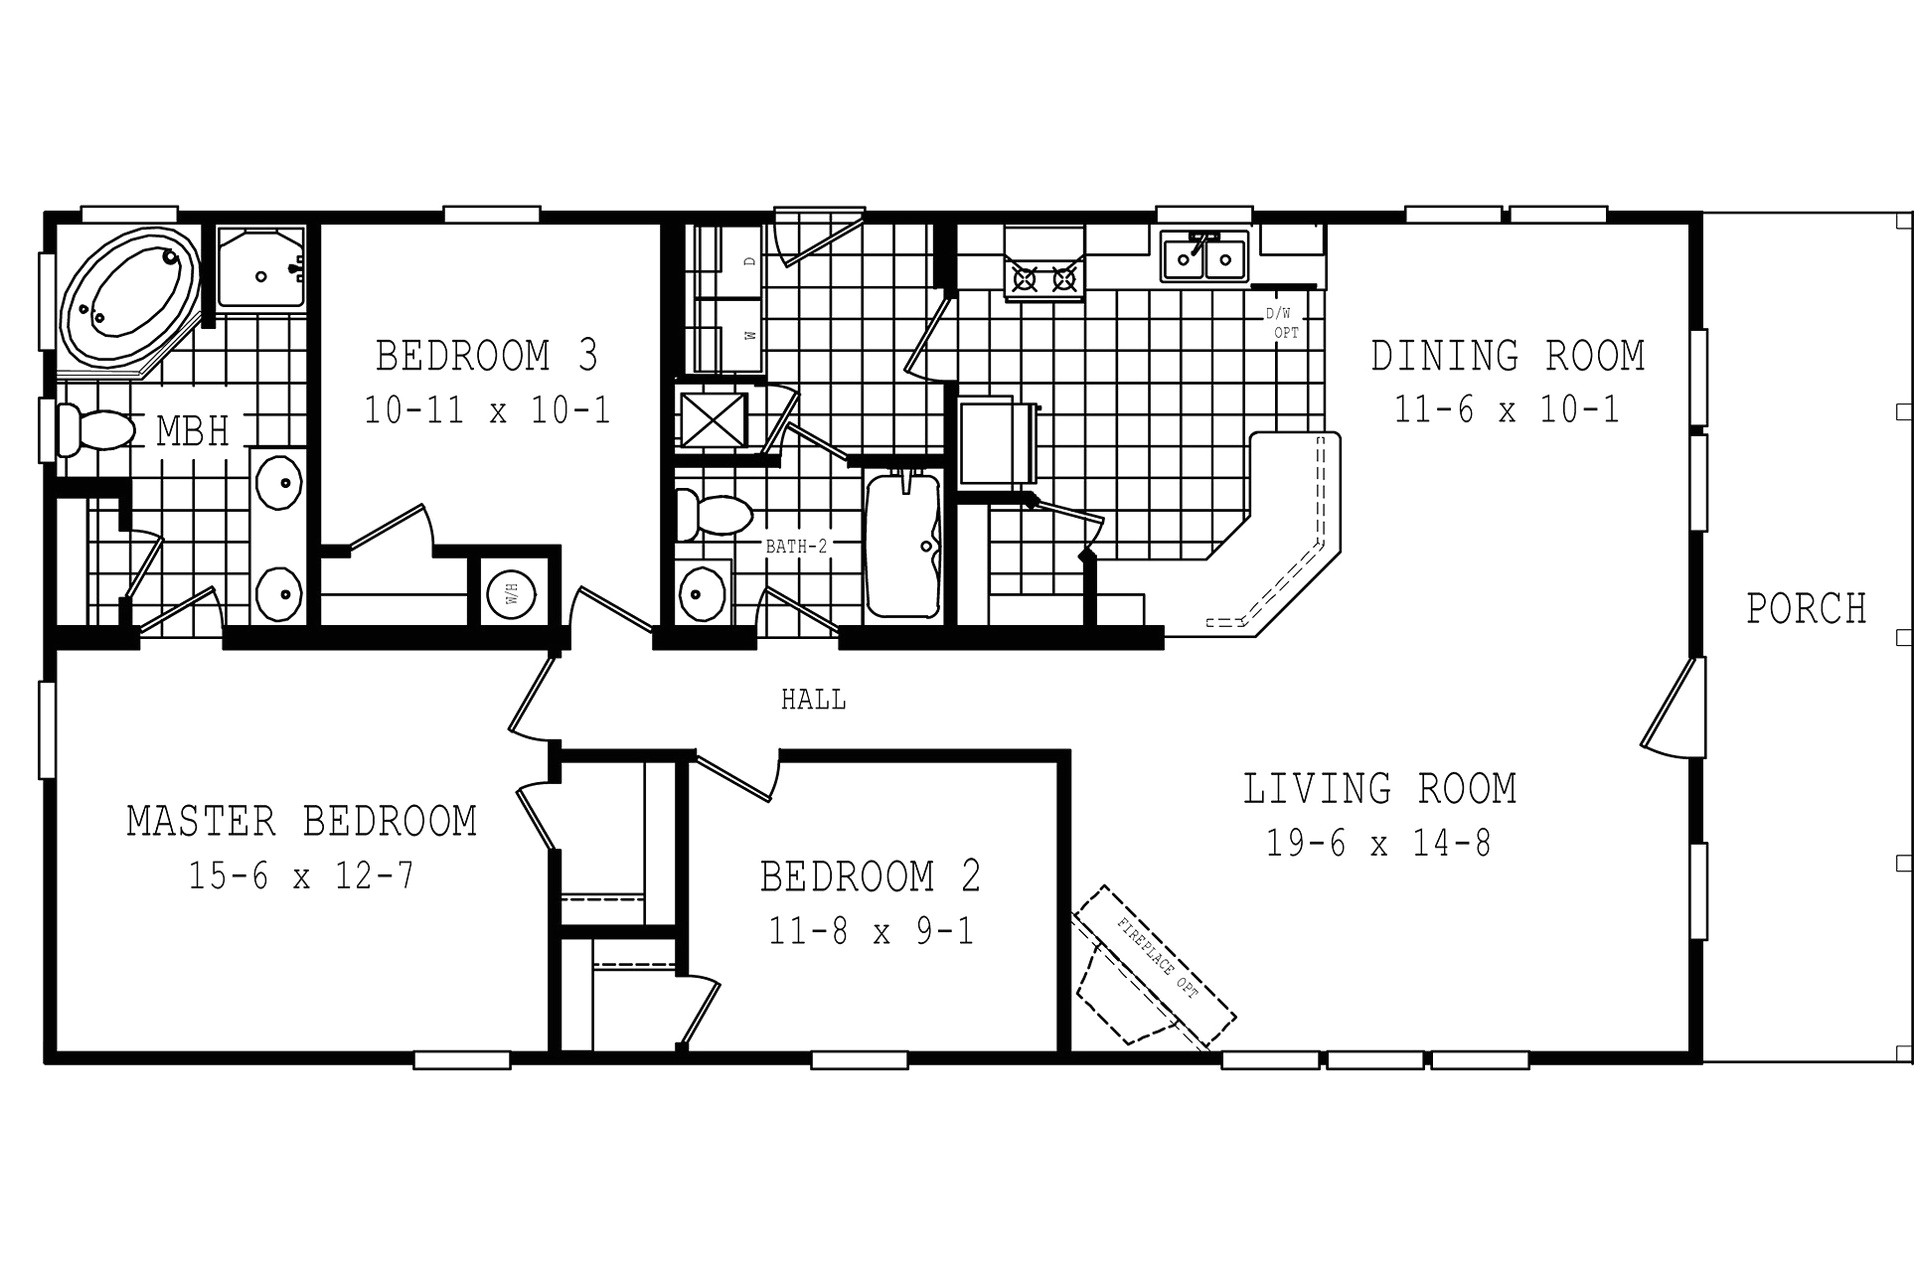 solitaire mobile home floor plans